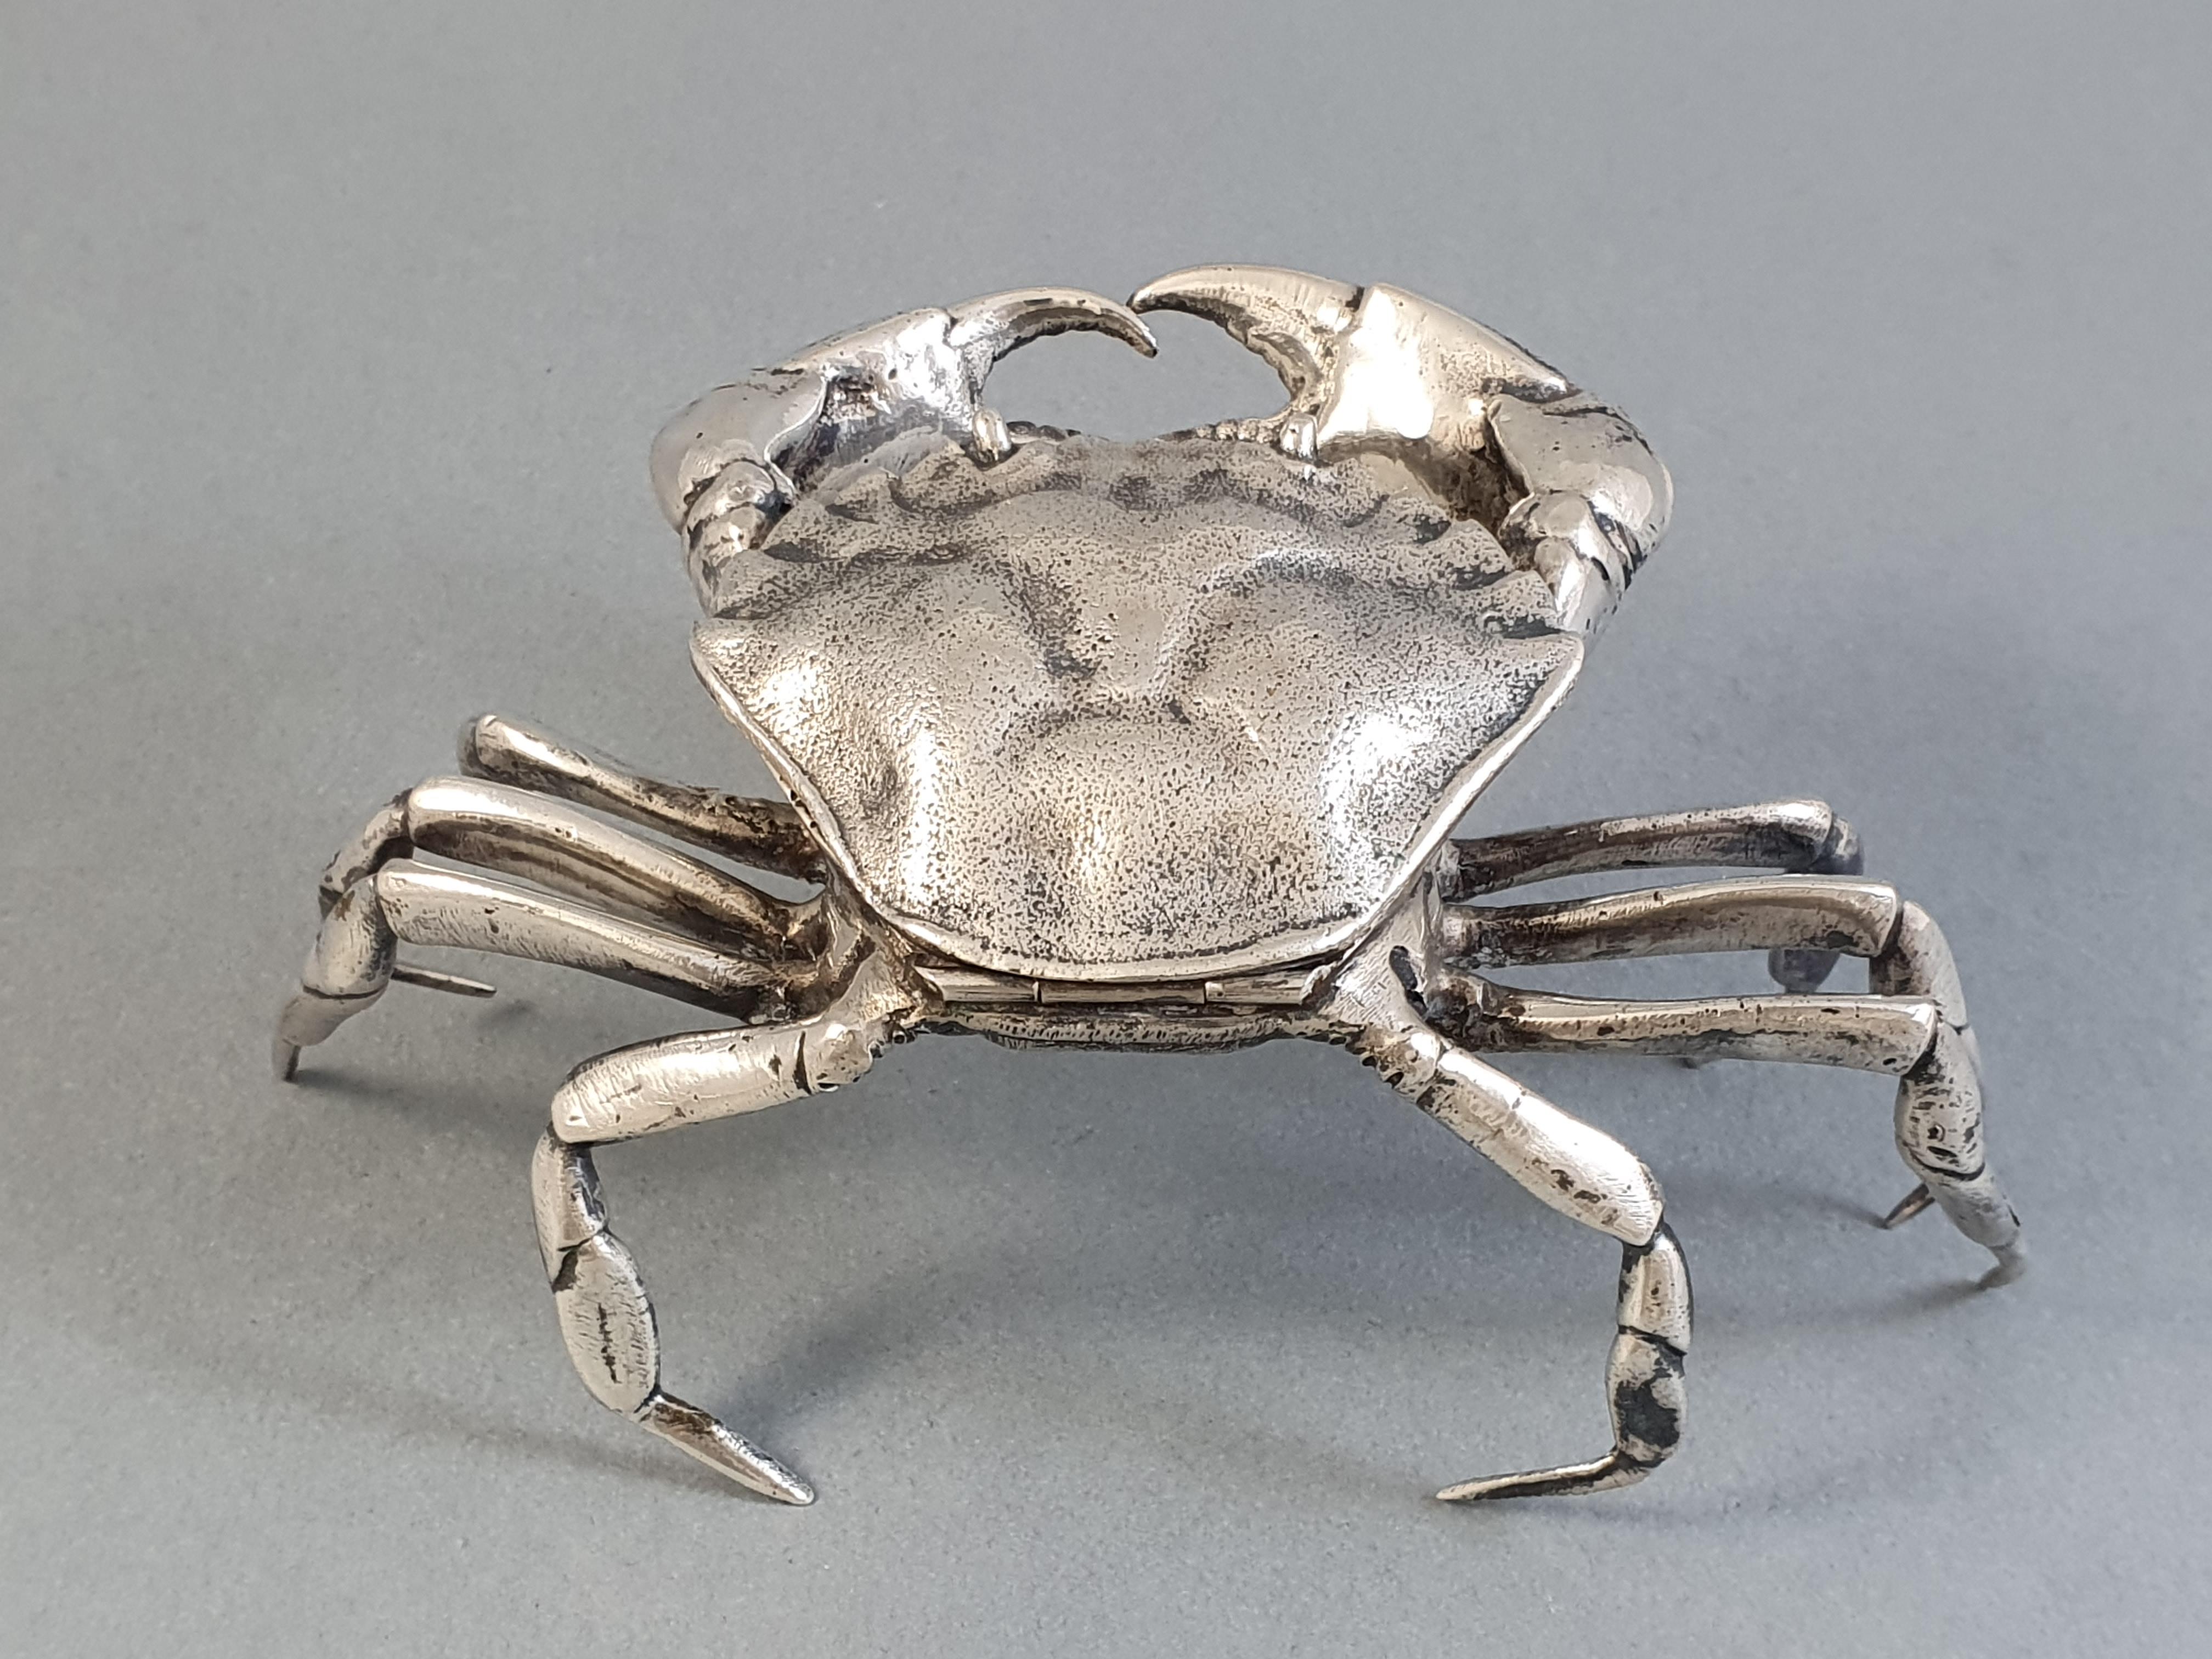 Pretty Sterling Silver crab-shaped salt cellar

Spanish work around 1970 
Sterling Silver hallmark: star 

Measures: Length: 12.2 cm 
Width: 8 cm 
Height: 5 cm 
Weight: 200 grams

Great condition.